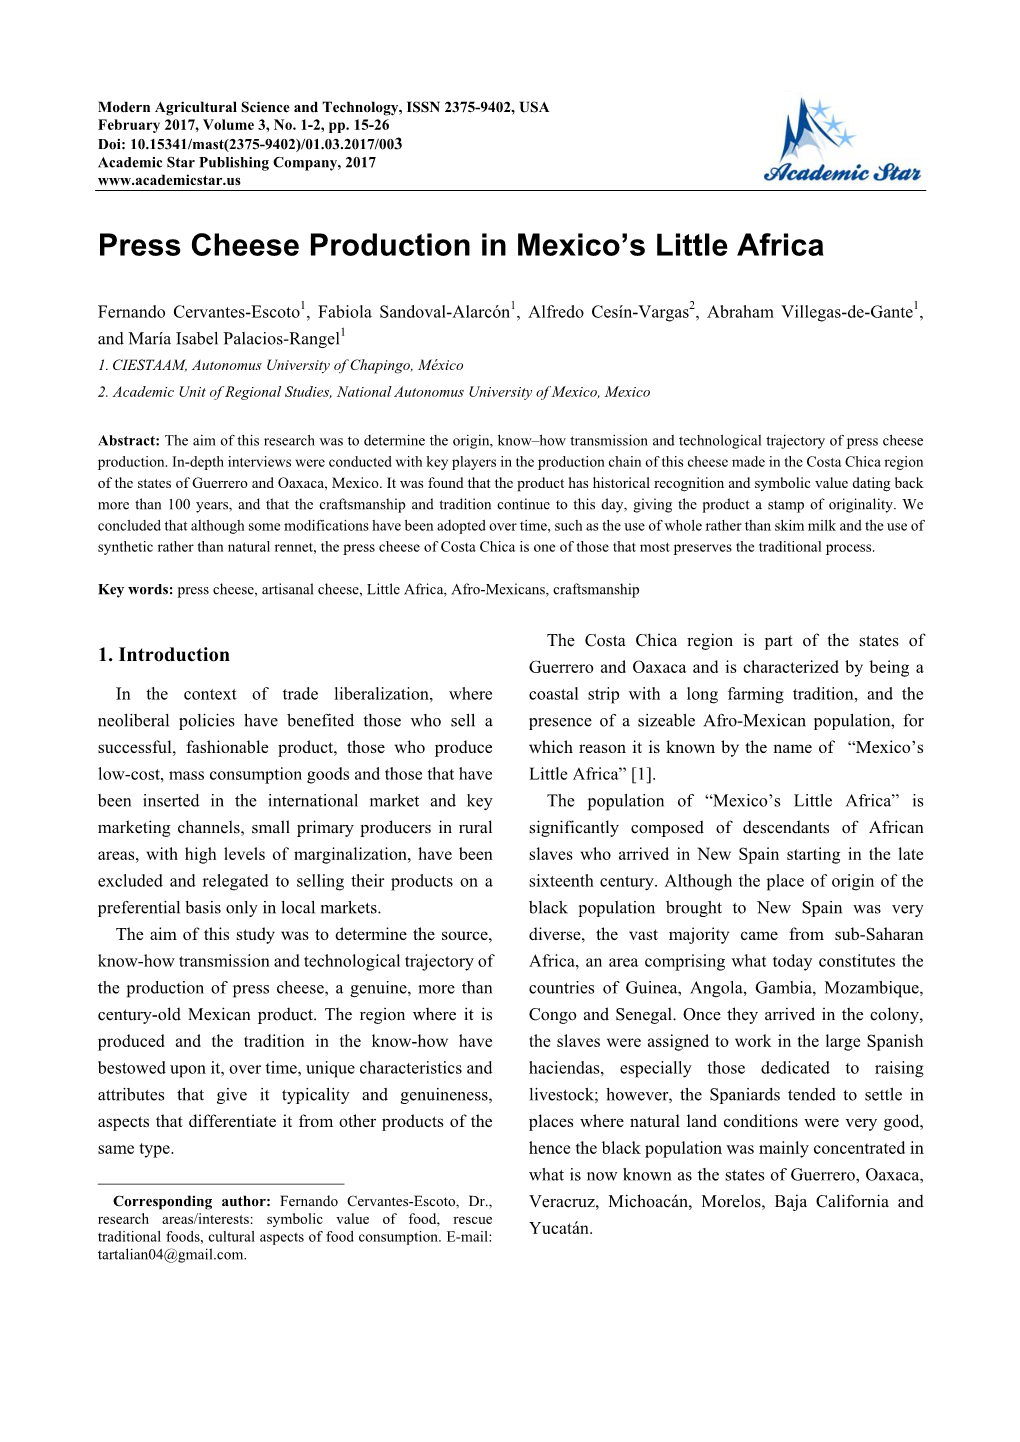 Press Cheese Production in Mexico's Little Africa